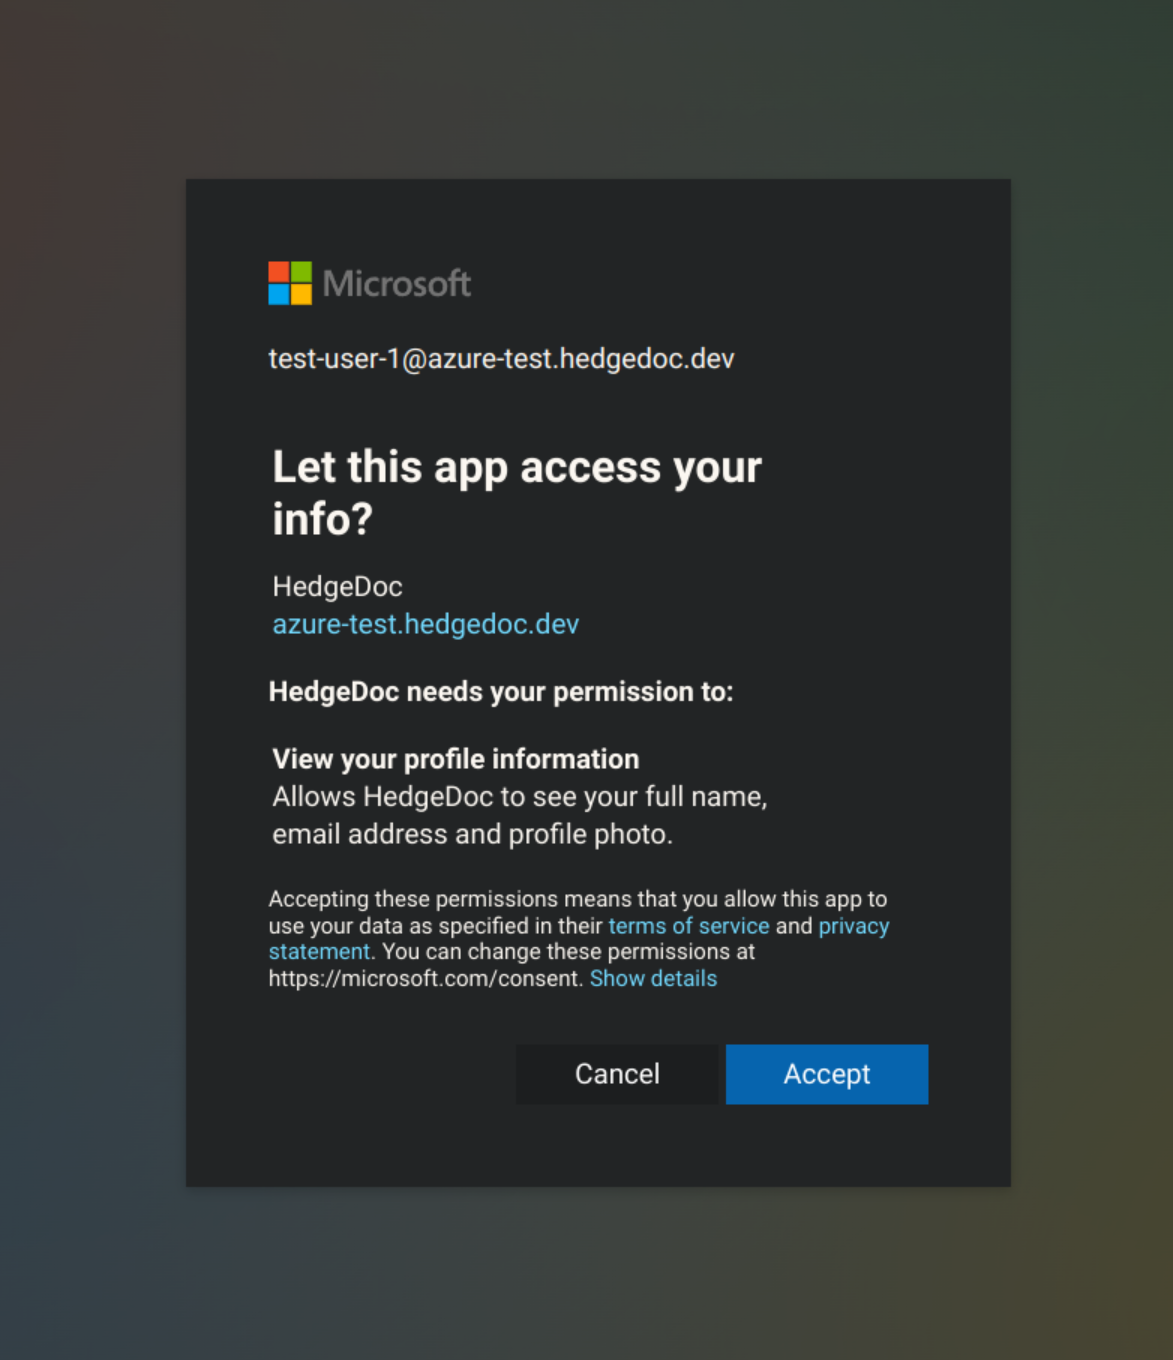 Microsoft login page asking for permissions